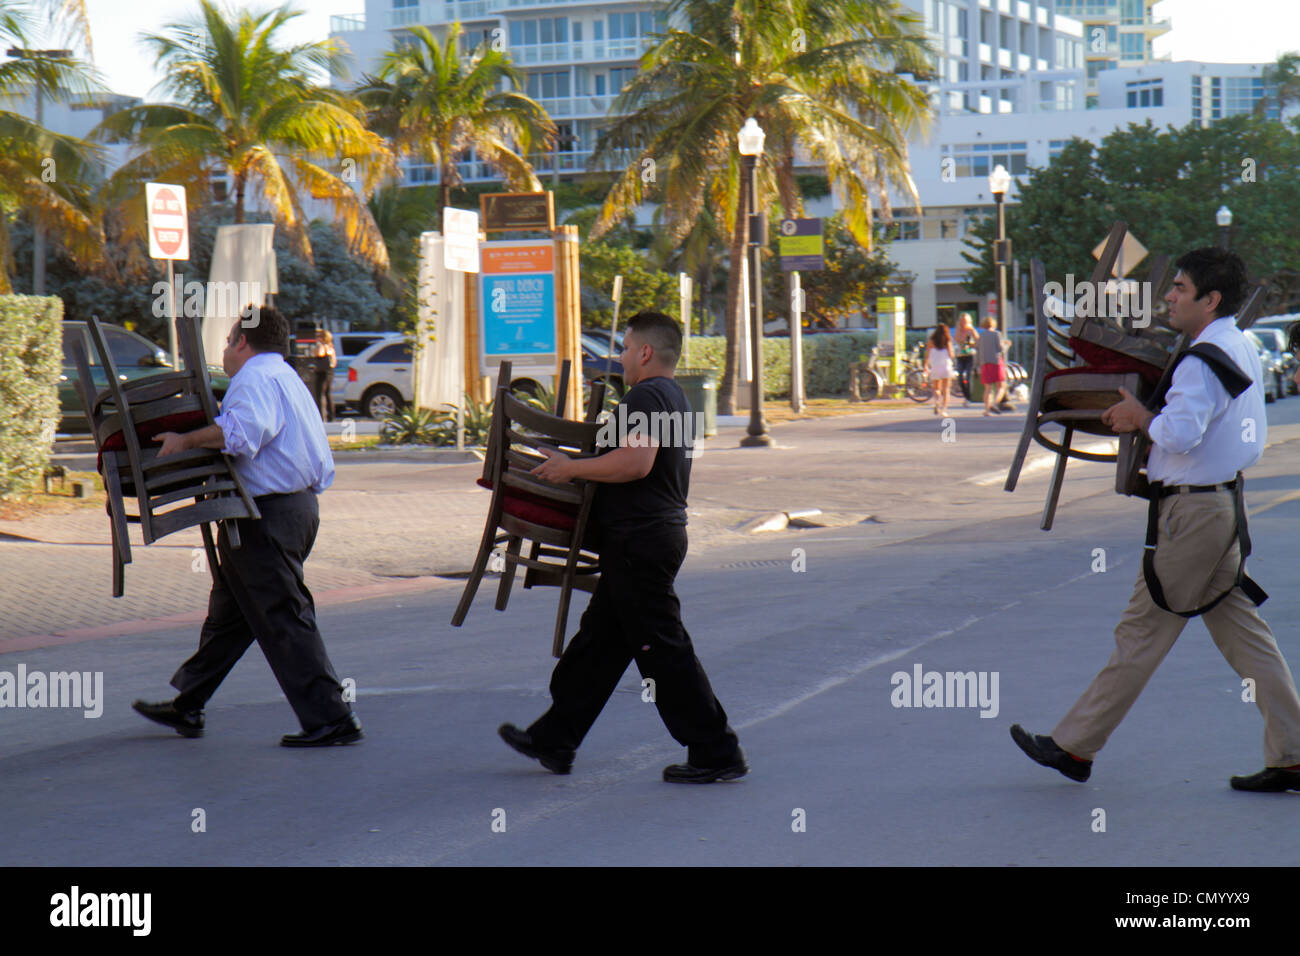 Miami Beach Florida,Collins Avenue,man men male adult adults,chairs,carrying,working,work,servers employee employees worker workers job jobs staff,hot Stock Photo